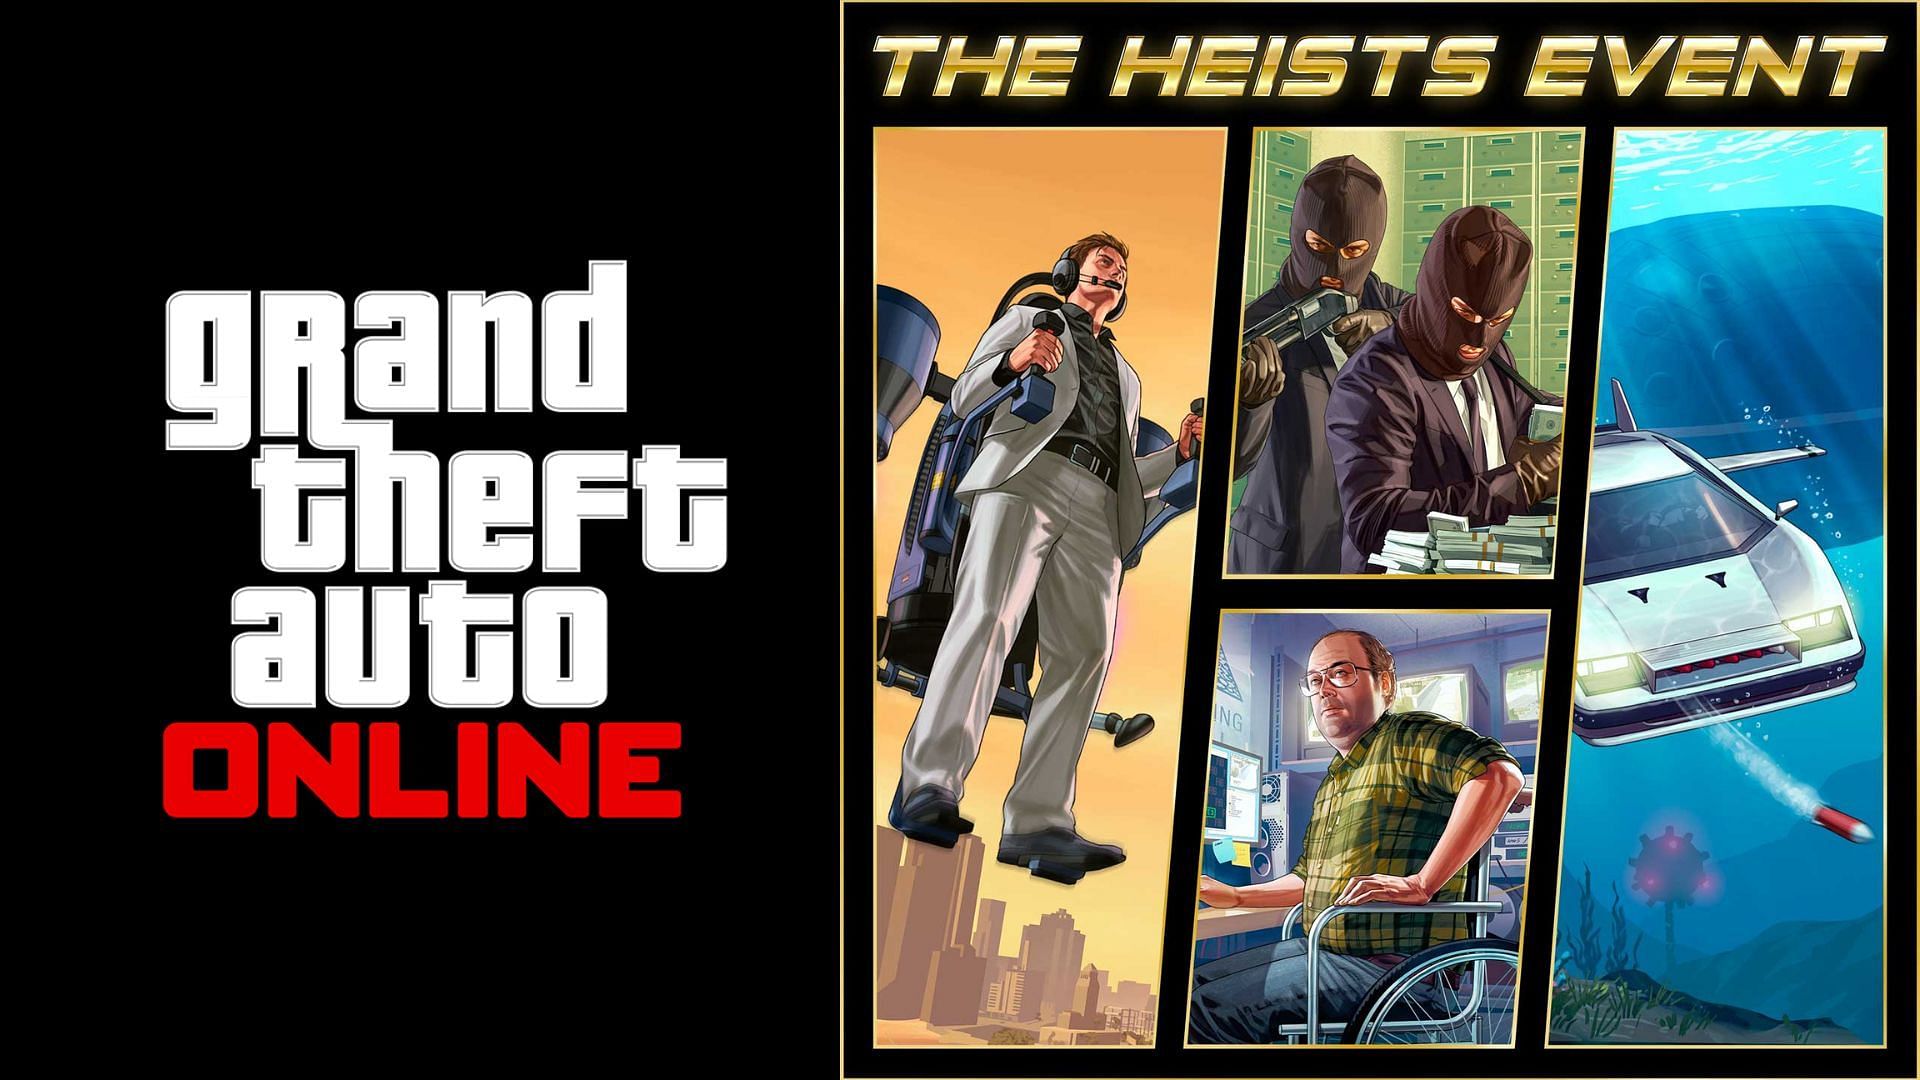 A brief about ongoing The Heist Event in GTA Online this week and earn $2 million bonus from it (Image via Rockstar Games)